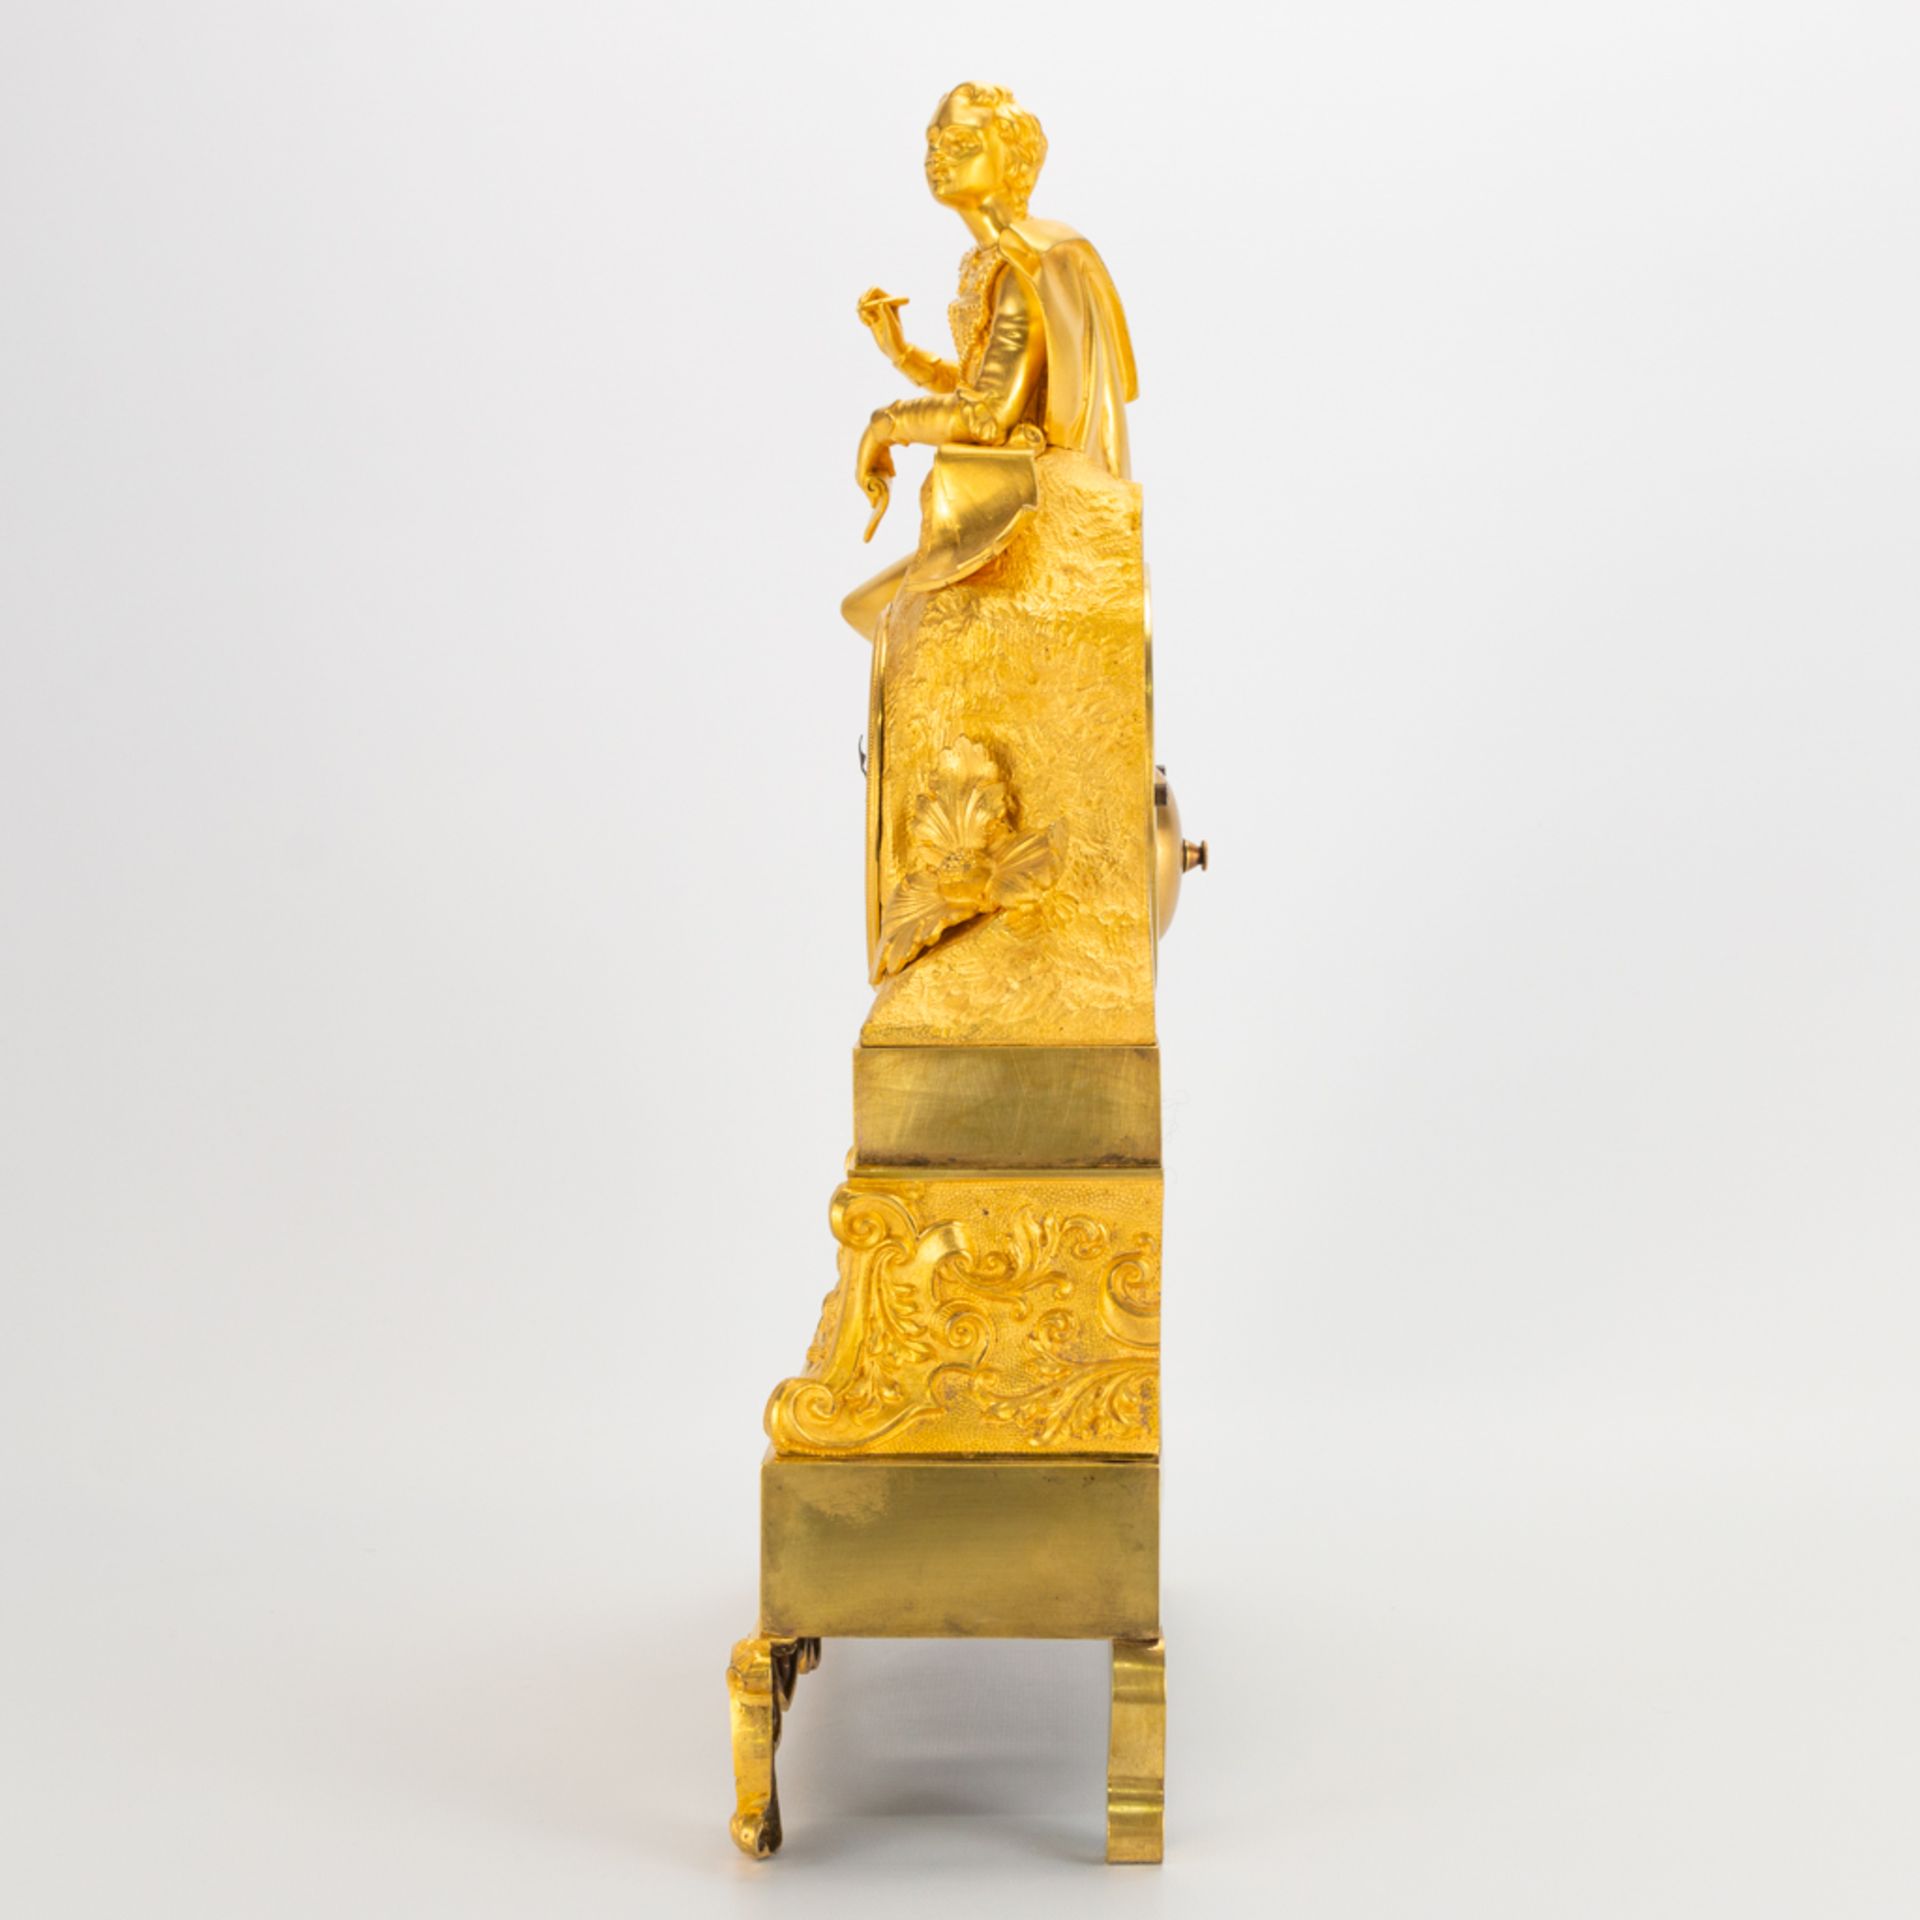 A ormolu gilt table clock made of bronze with a figurine of a noble man, enamel dial and marked Amst - Image 7 of 16